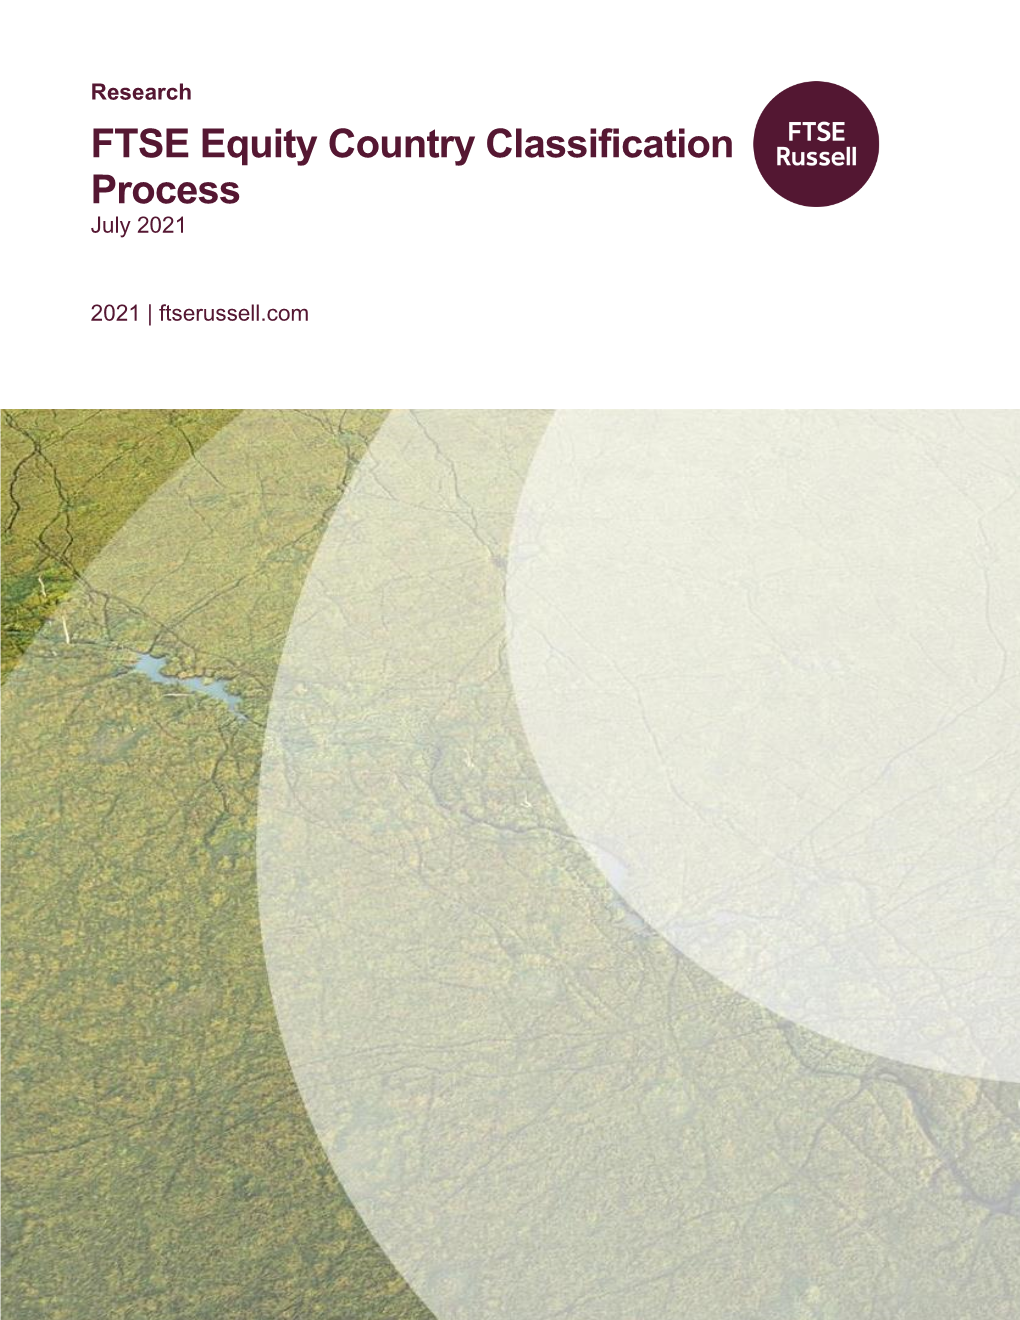 FTSE Equity Country Classification Process Which Is Designed to Be Transparent and Evidence Driven